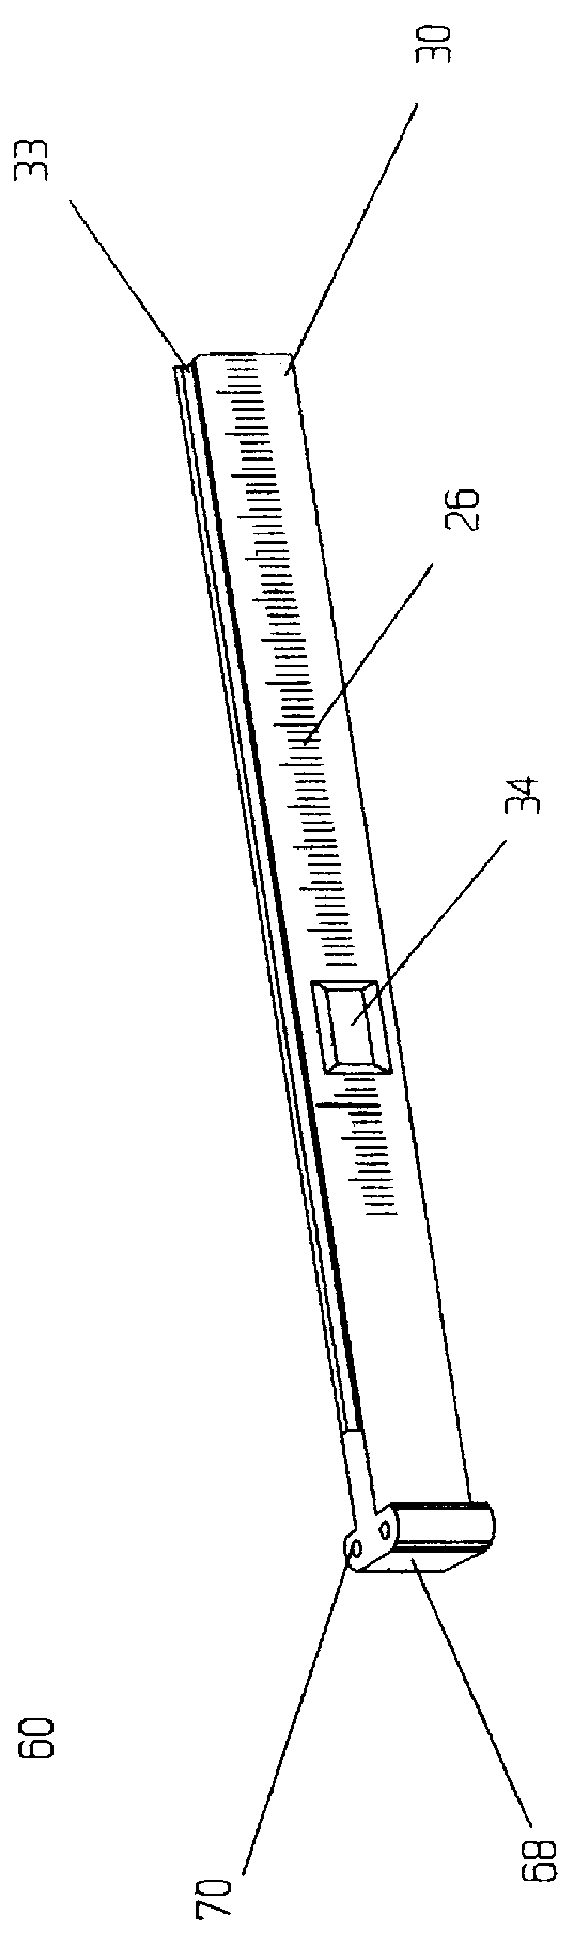 Instant angle gauge